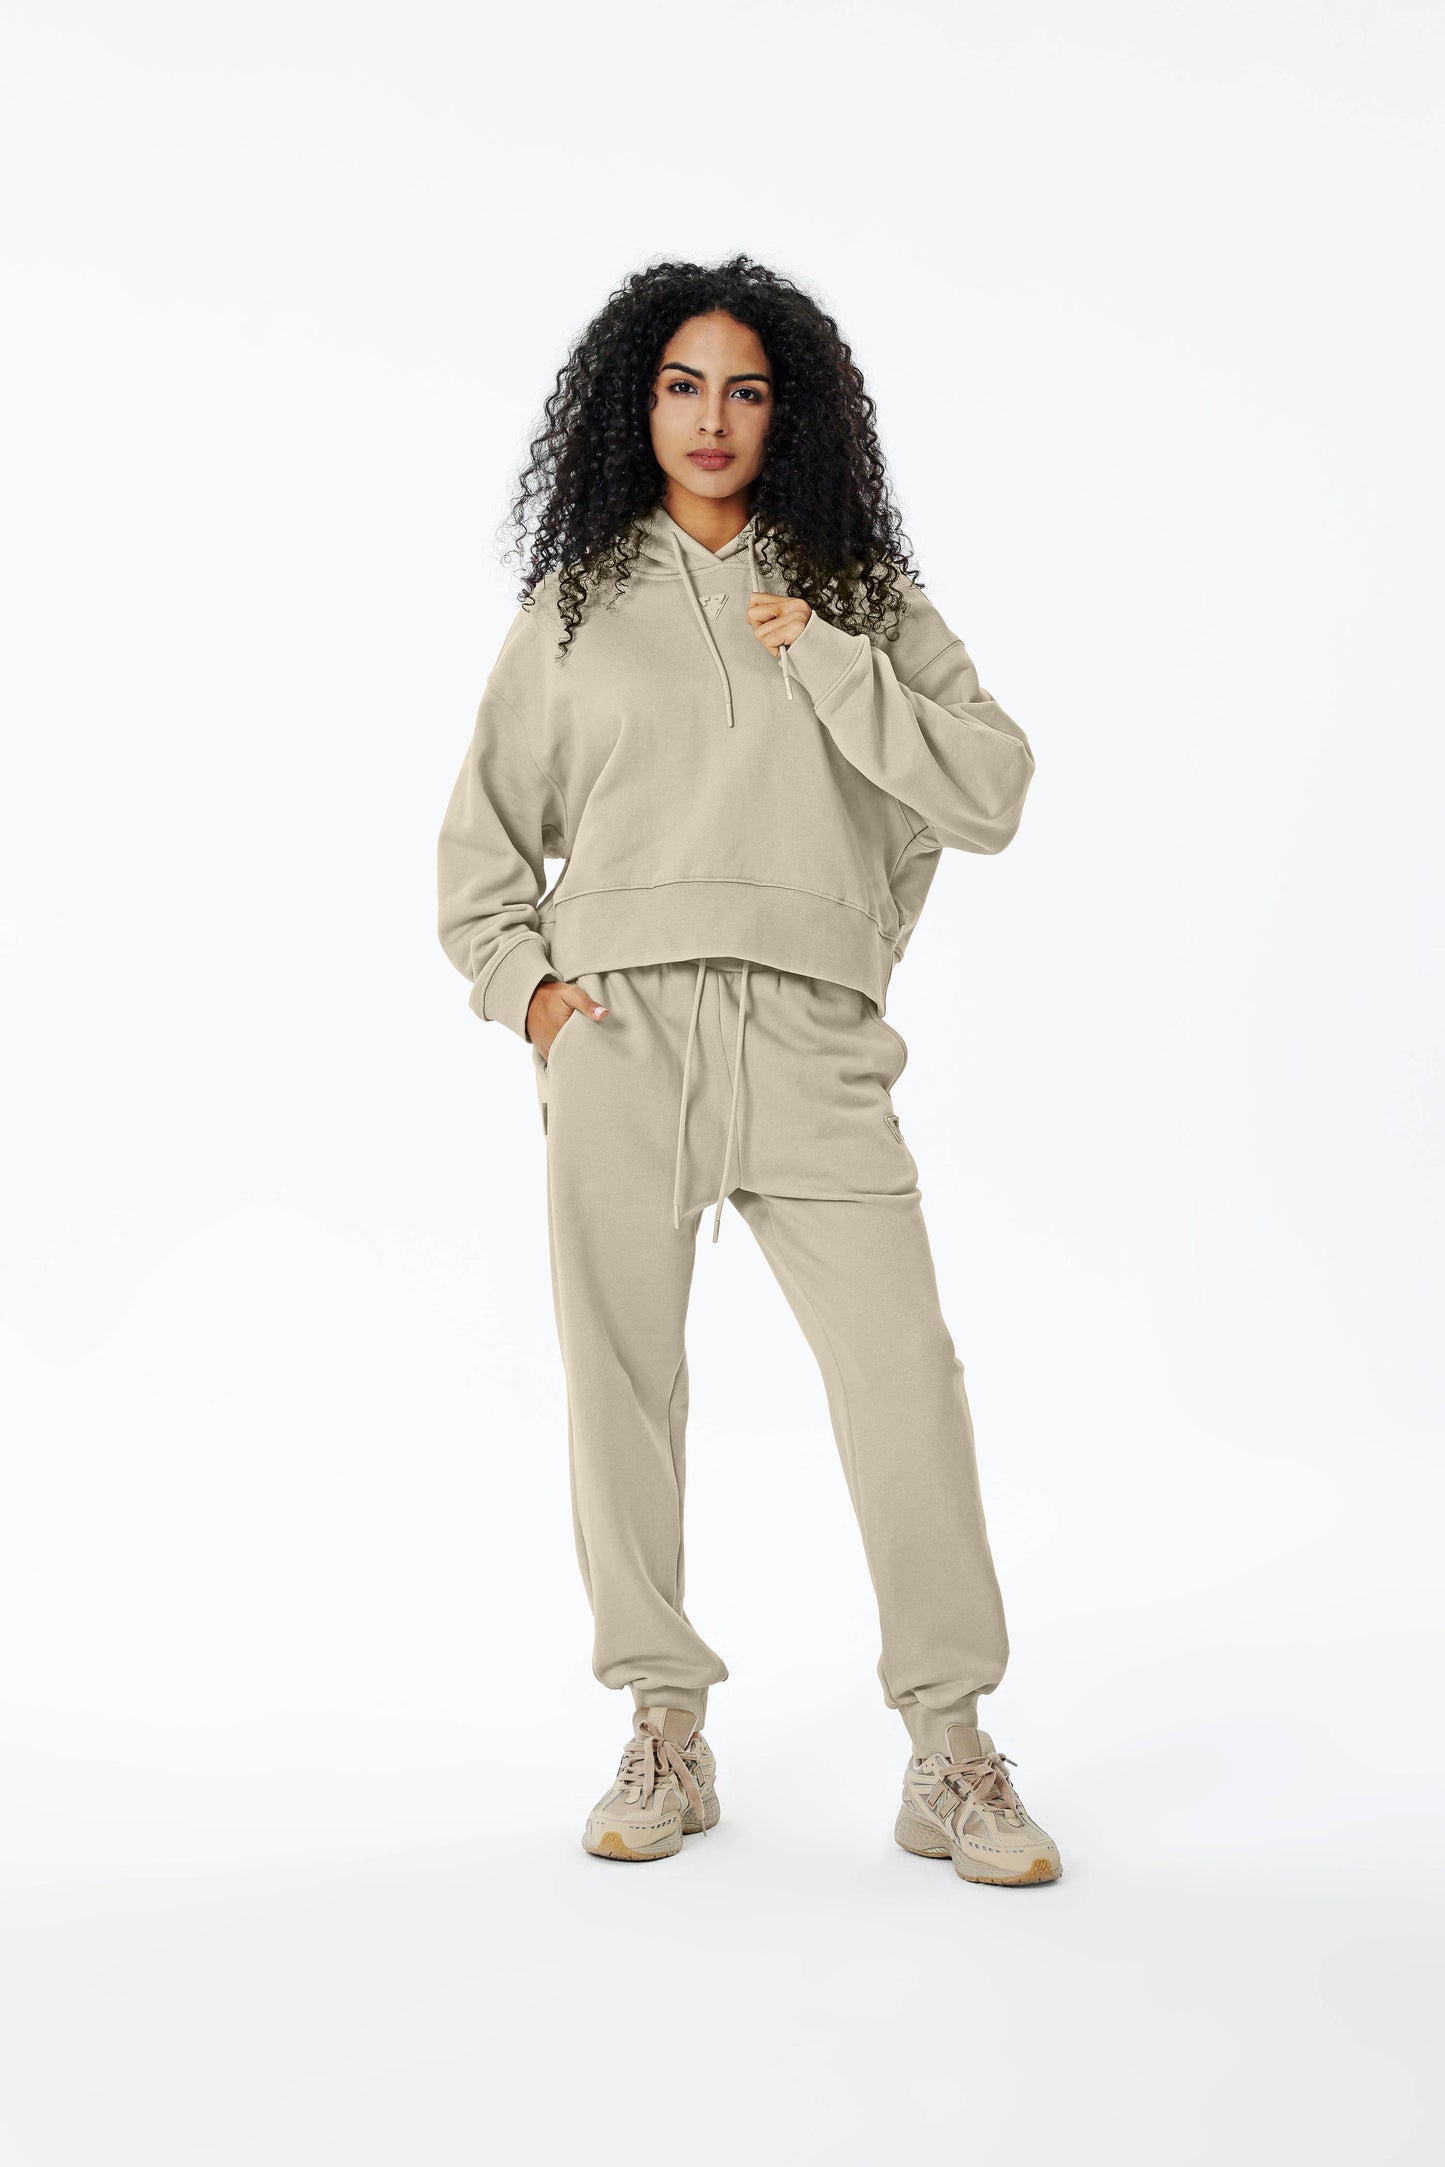 Women's Sweatpants with Ribbed Cuffs